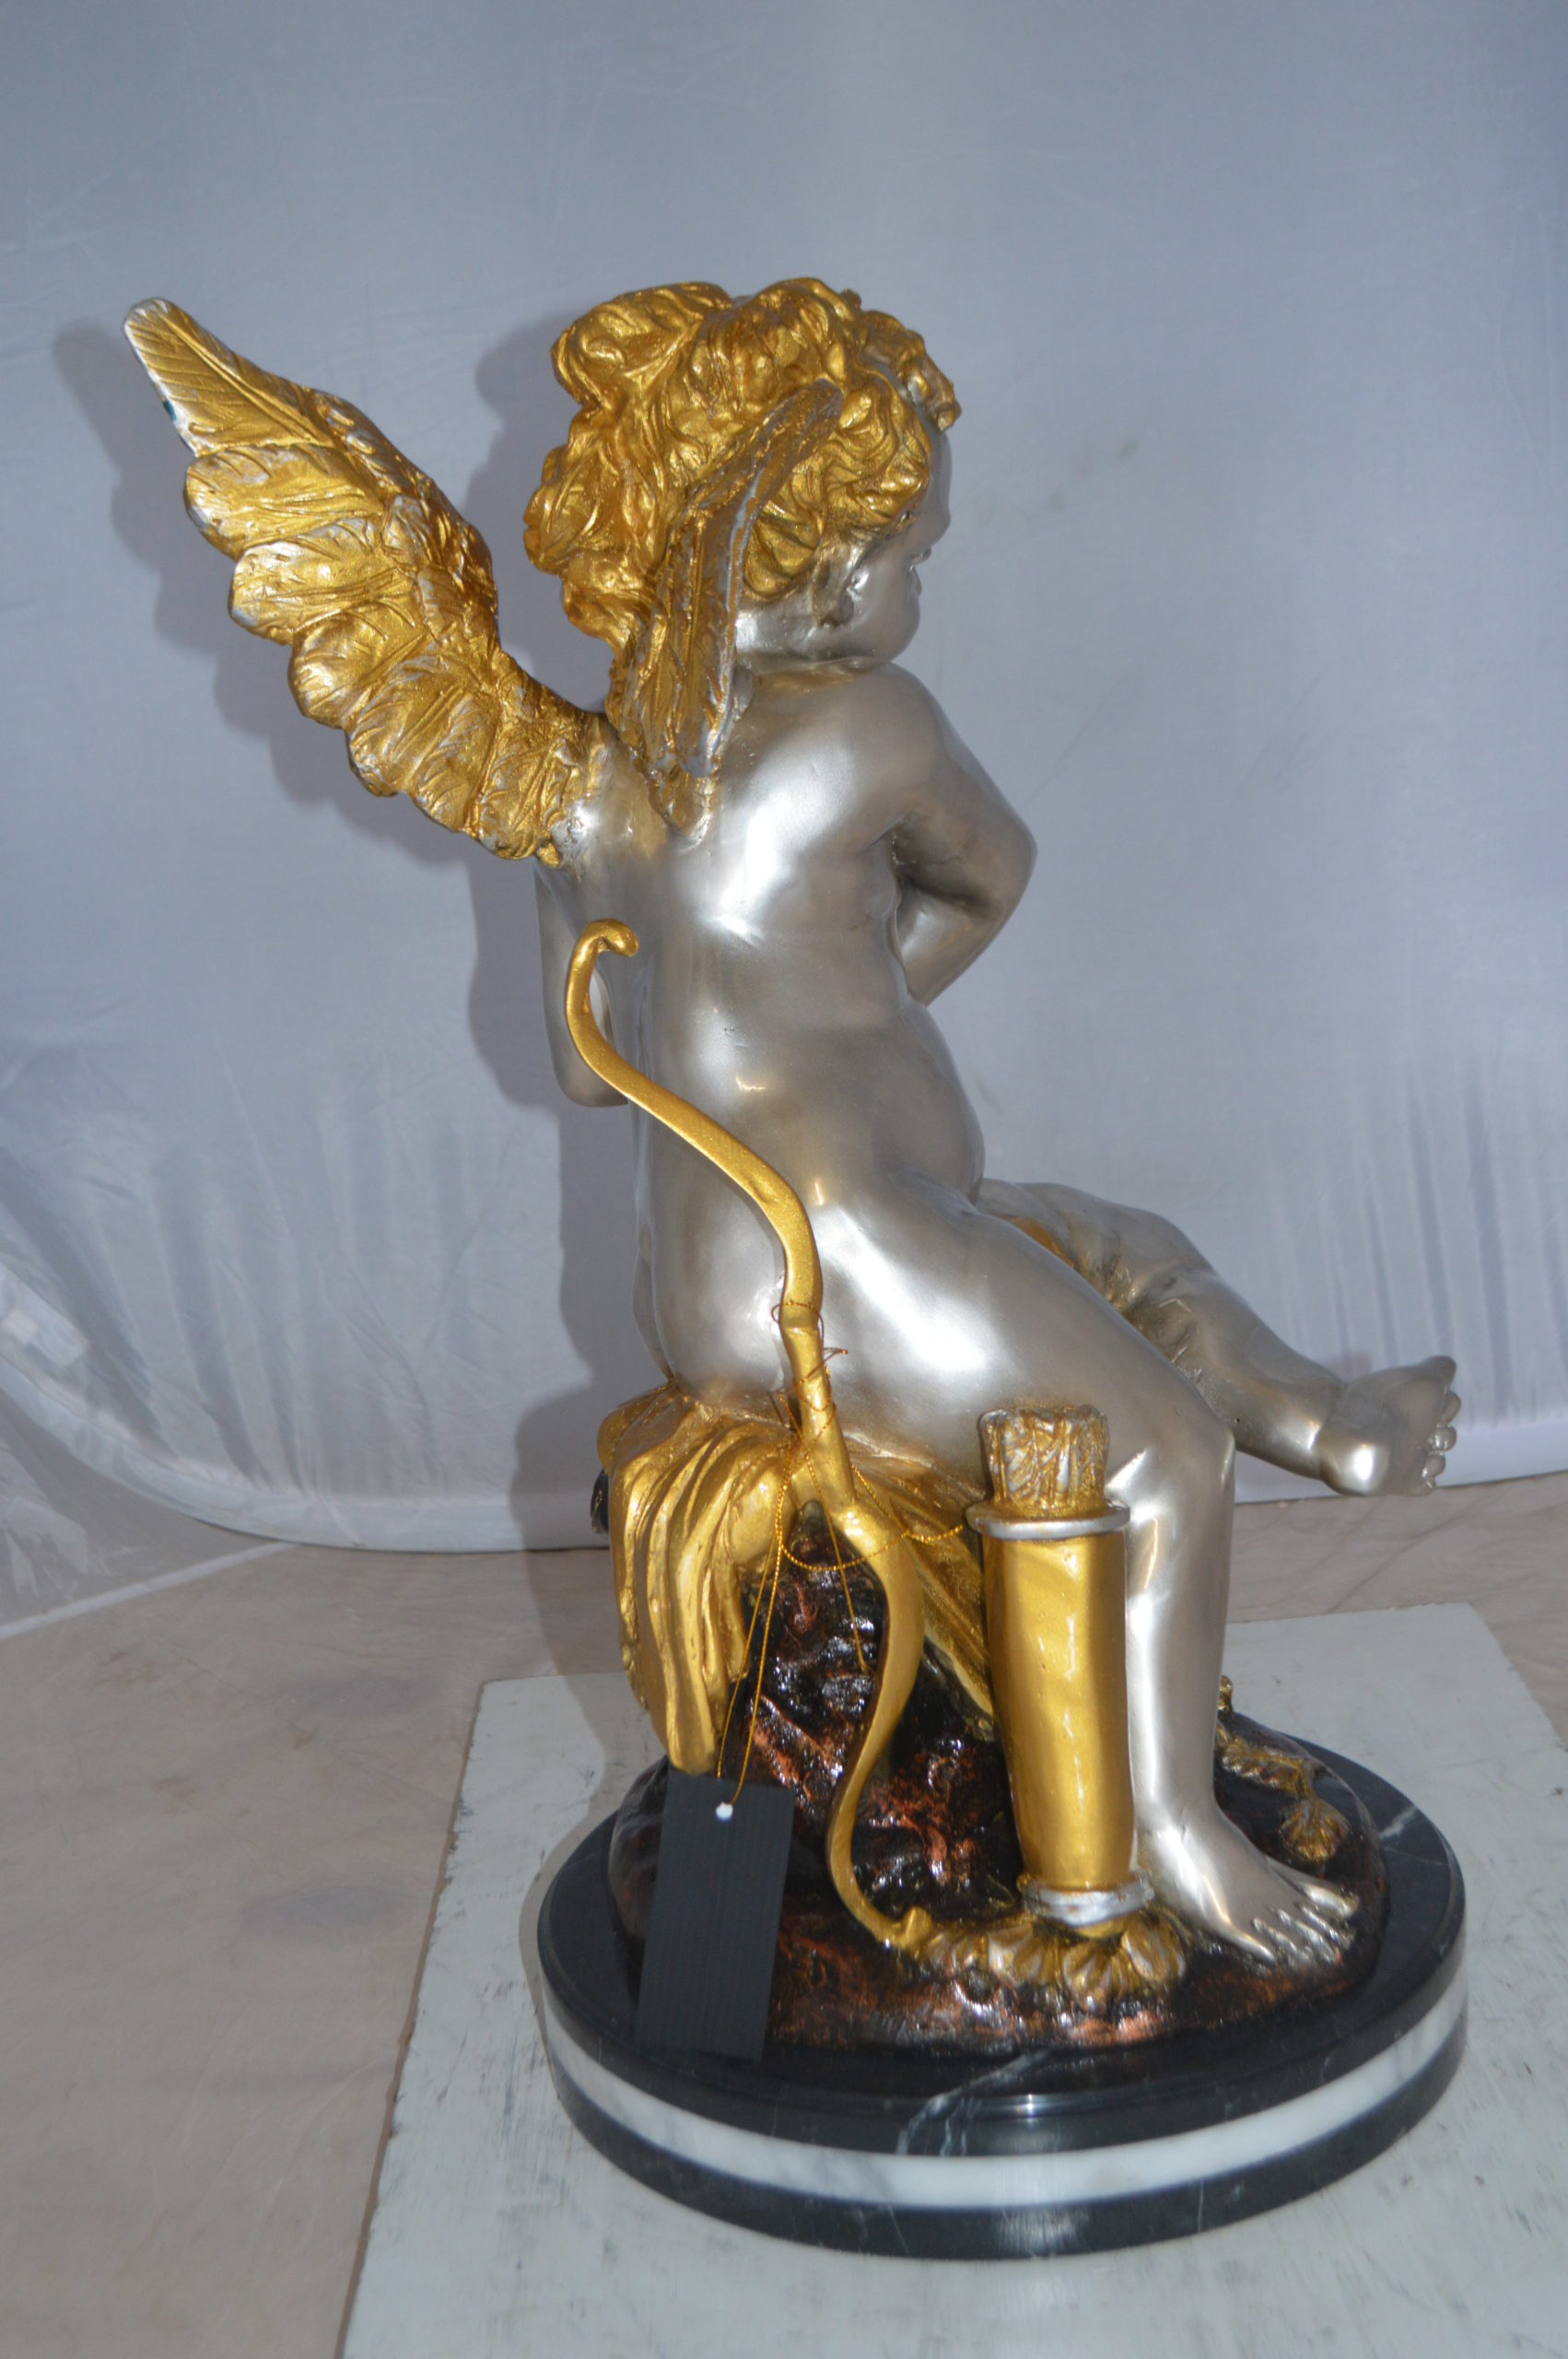 Nifao Cupid Girl On A Rock Bronze Statue - Size: 20"L x 15"W x 25"H. - image 5 of 14